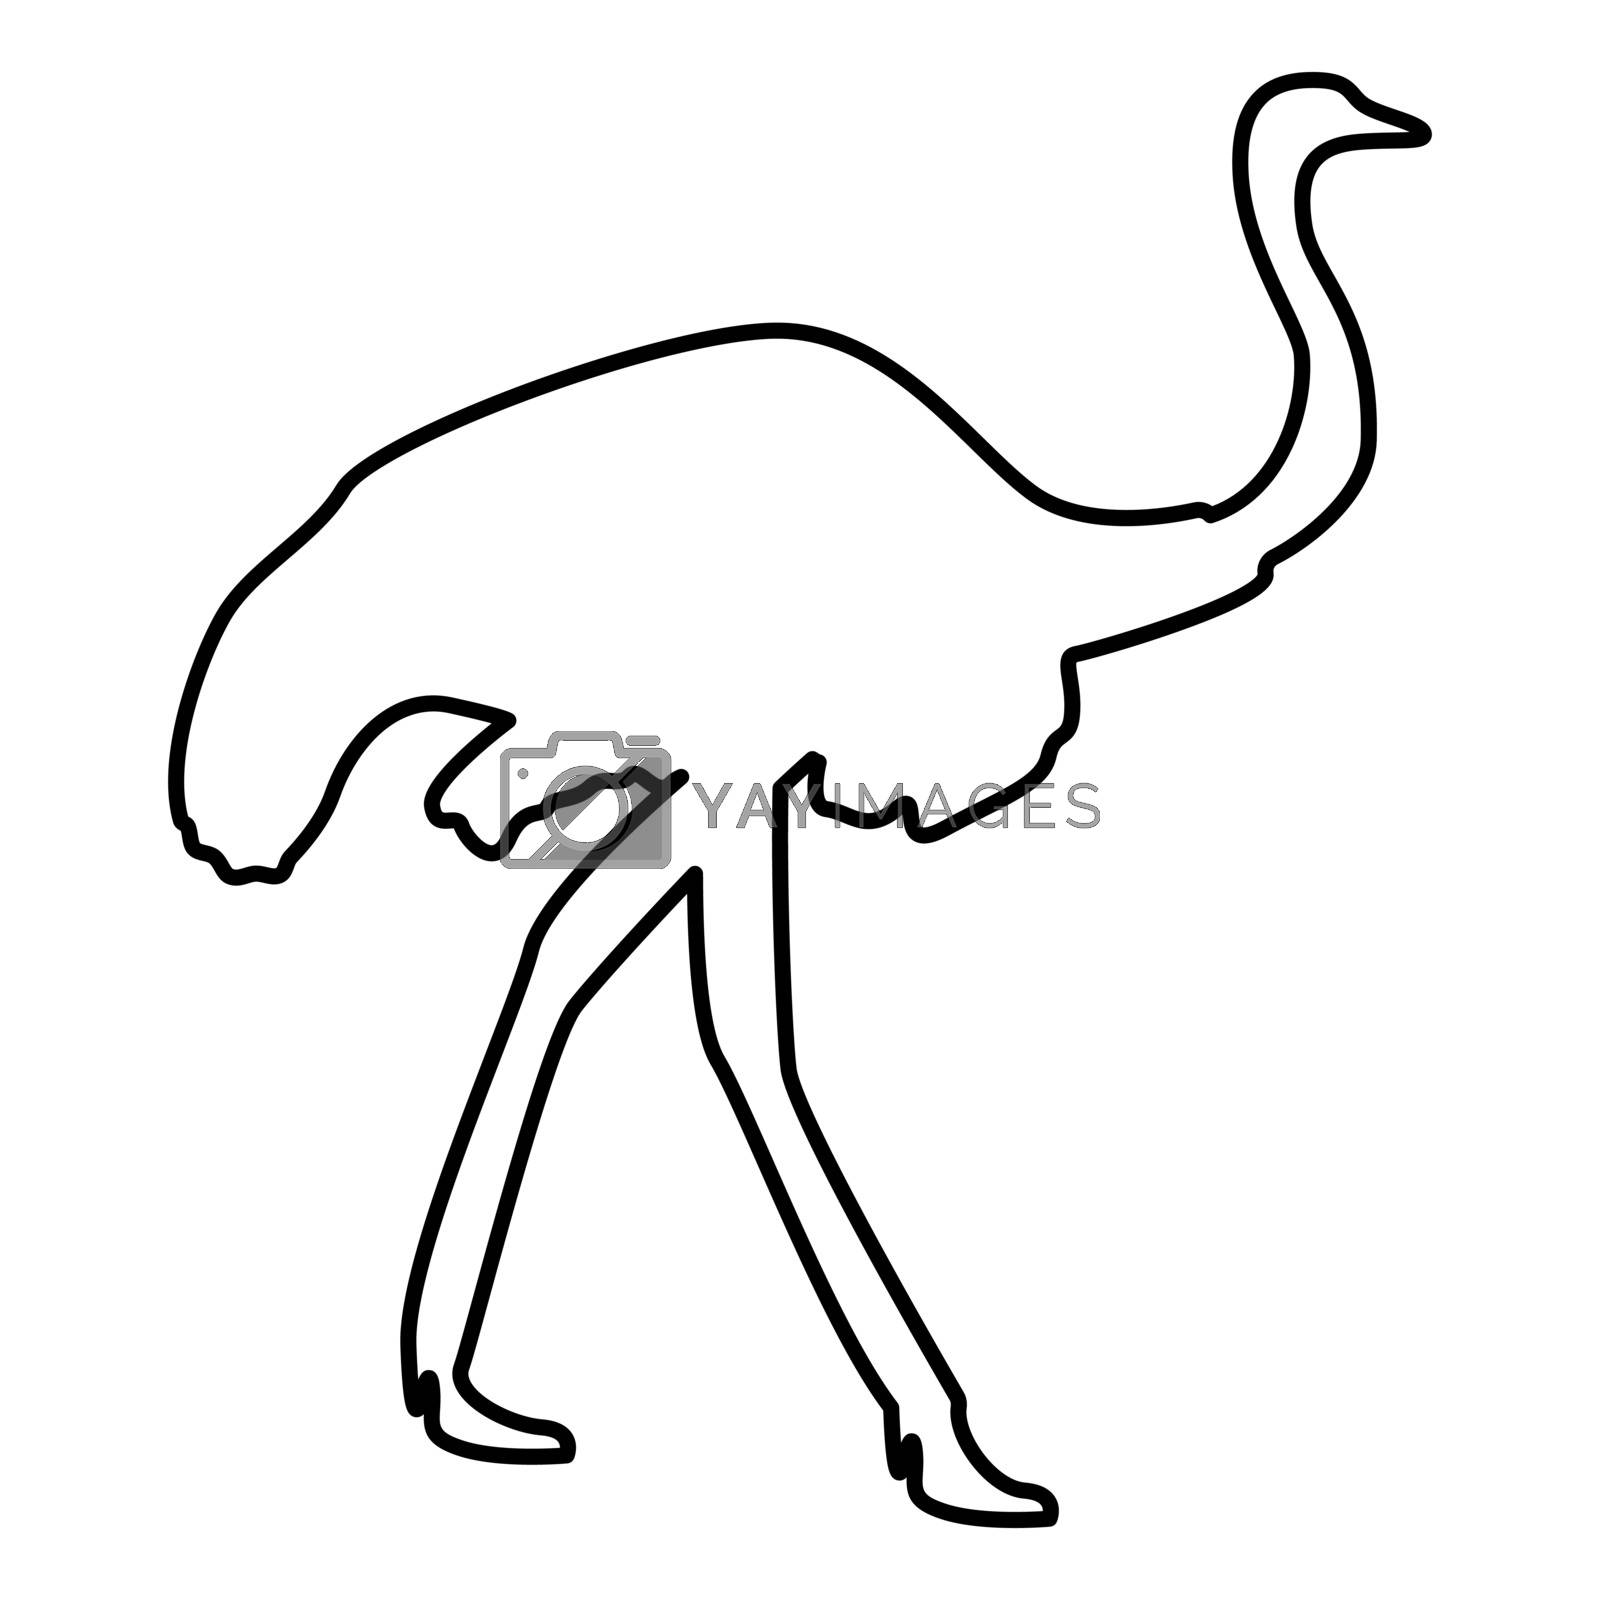 Royalty free image of Ostrich icon black color illustration flat style simple image by serhii435